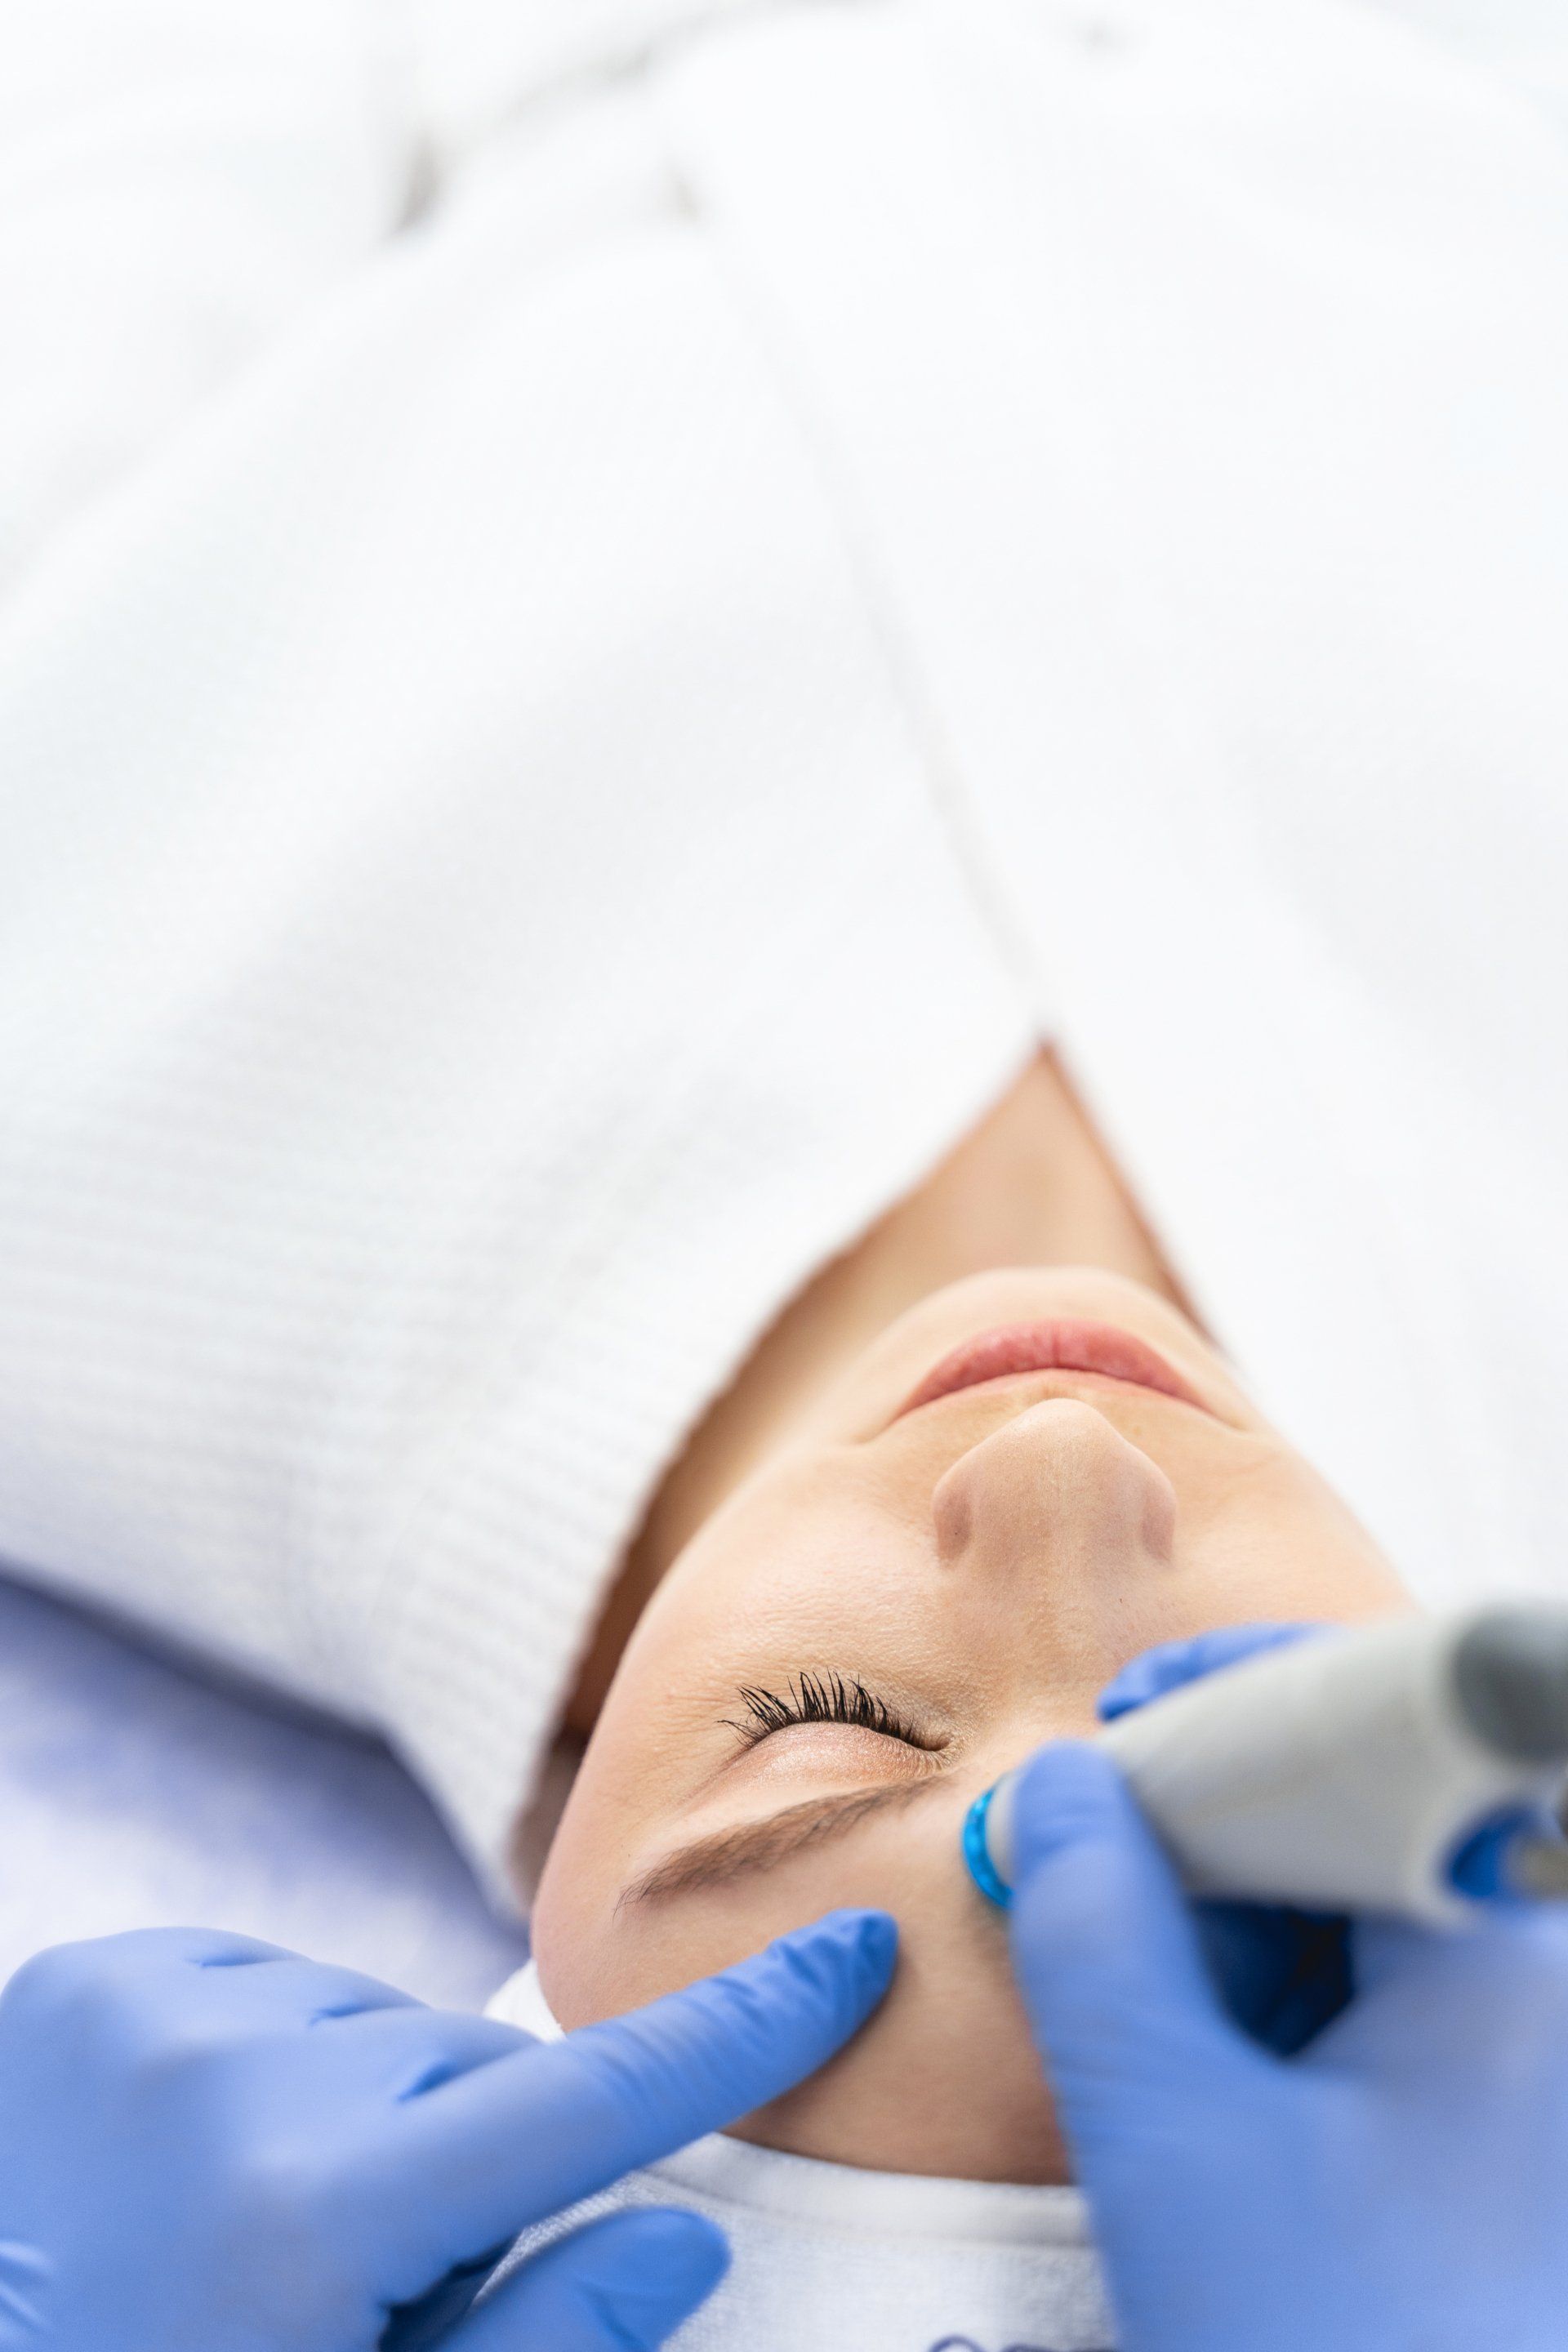 A woman getting microdermabrasion treatment on her face